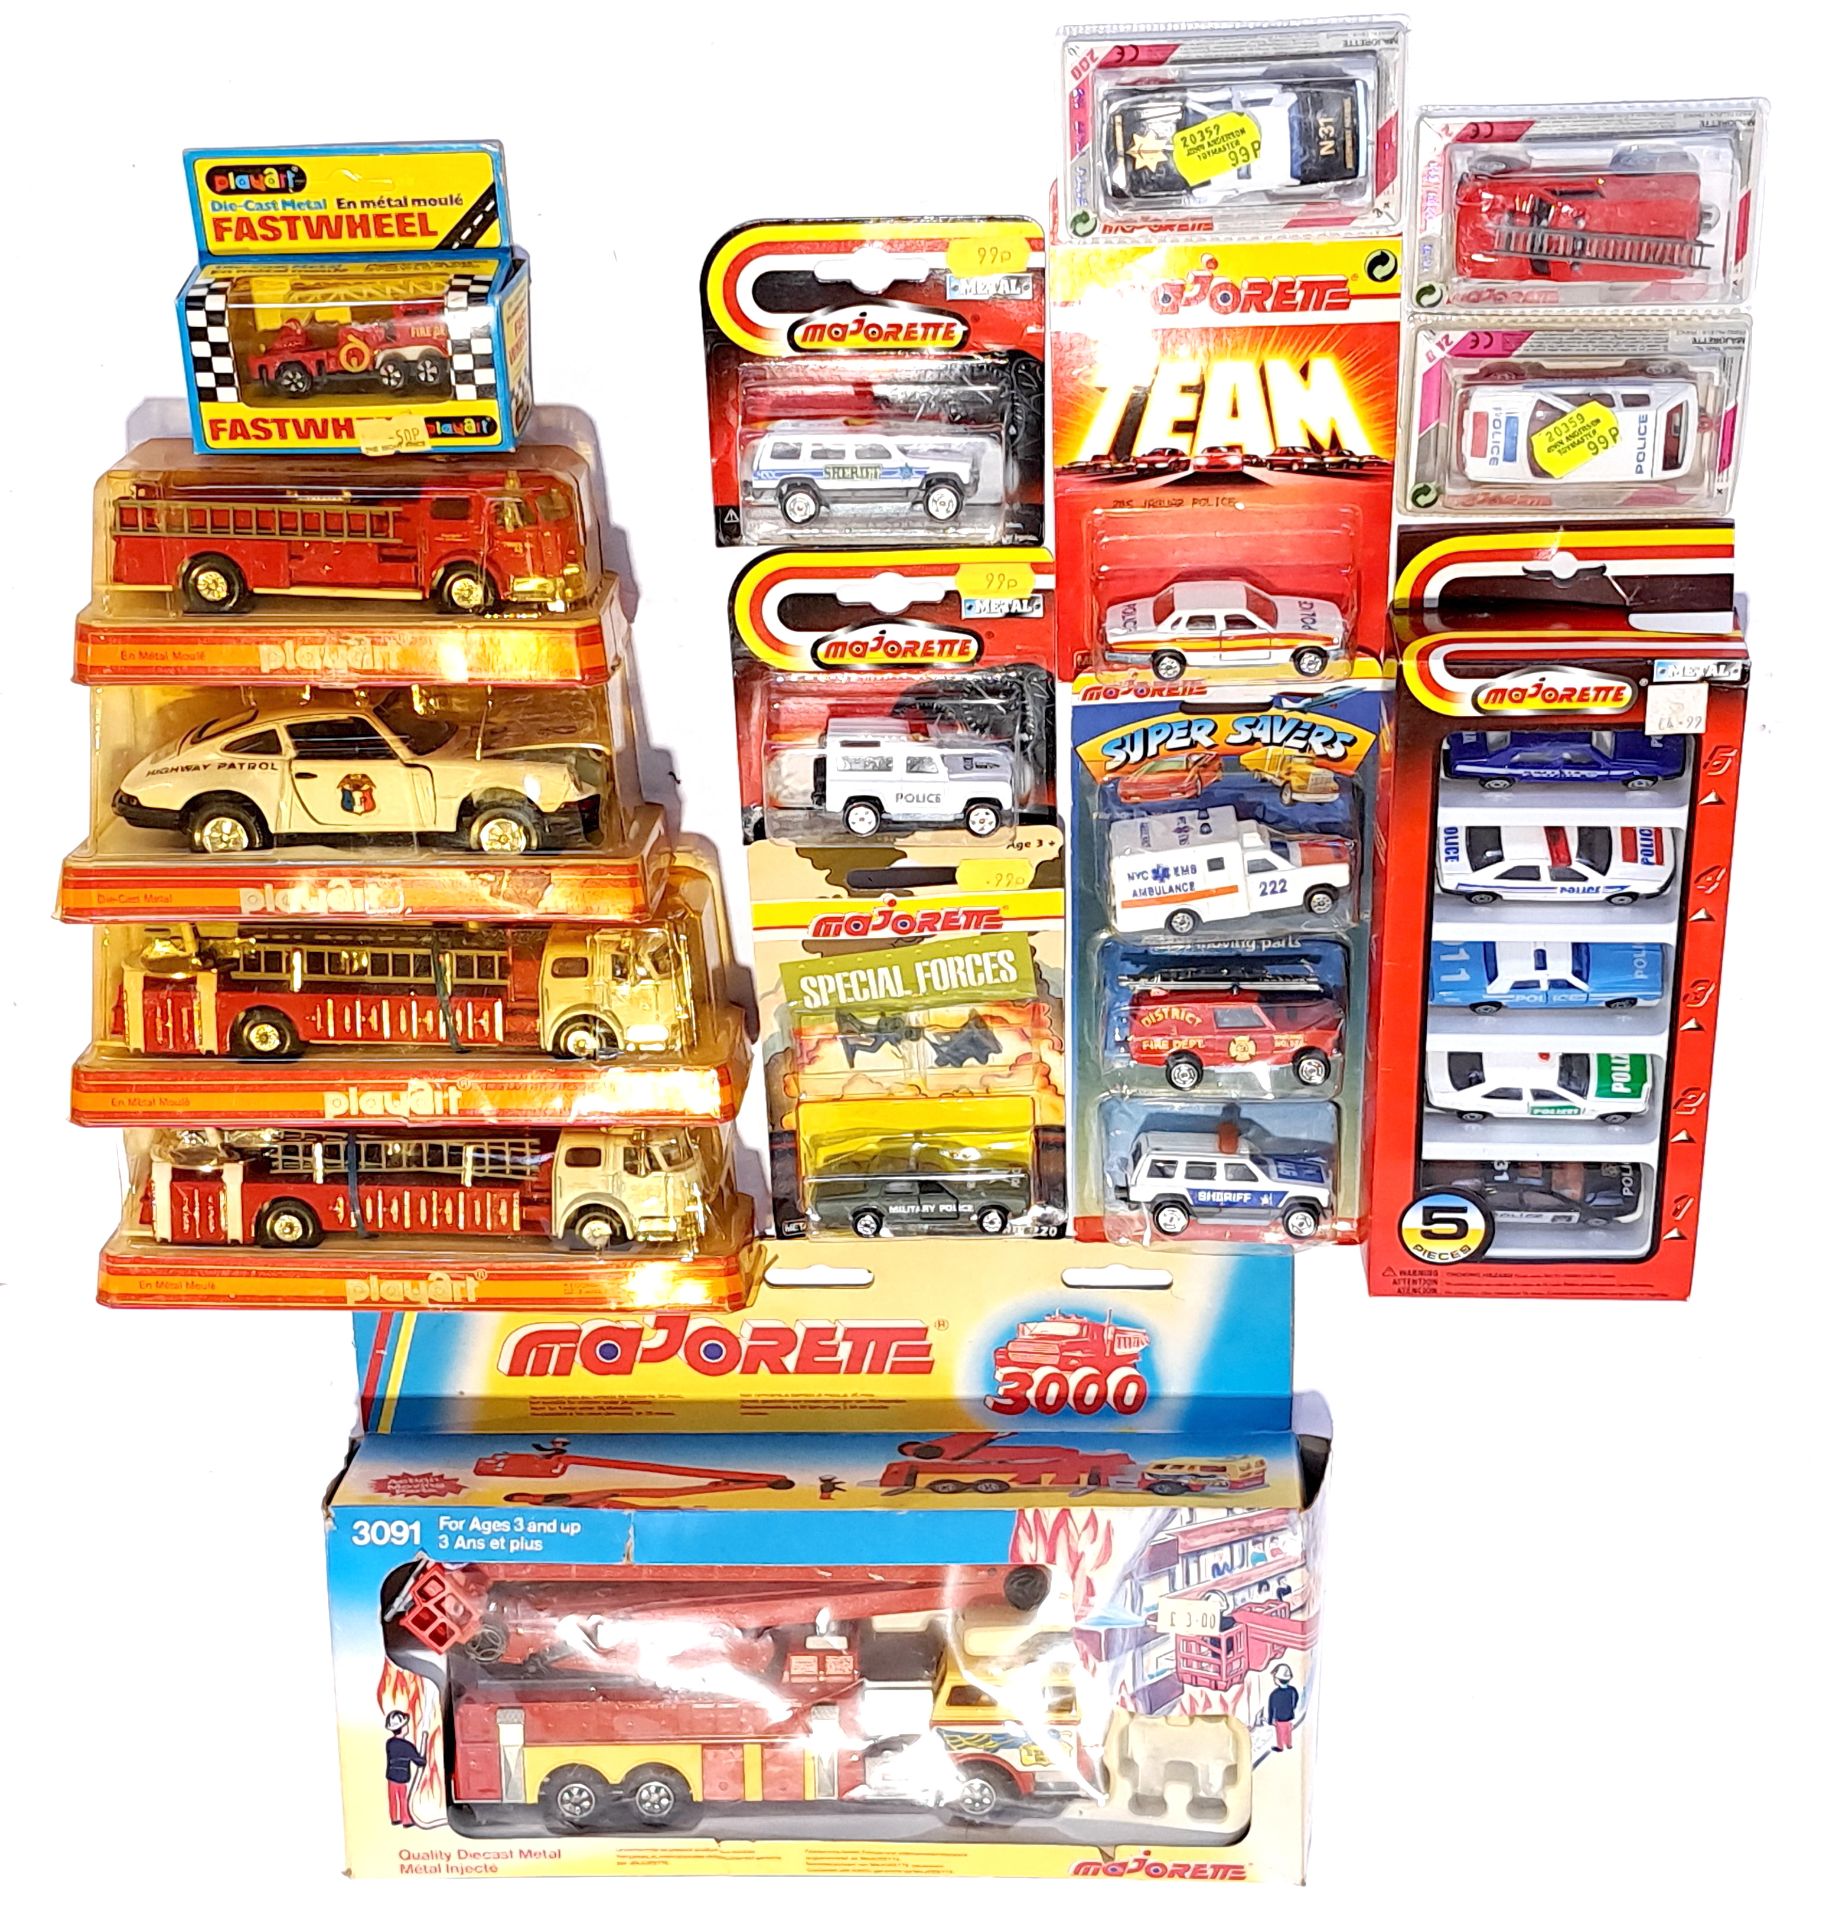 Playart & Majorette, a boxed & carded Emergency vehicle group